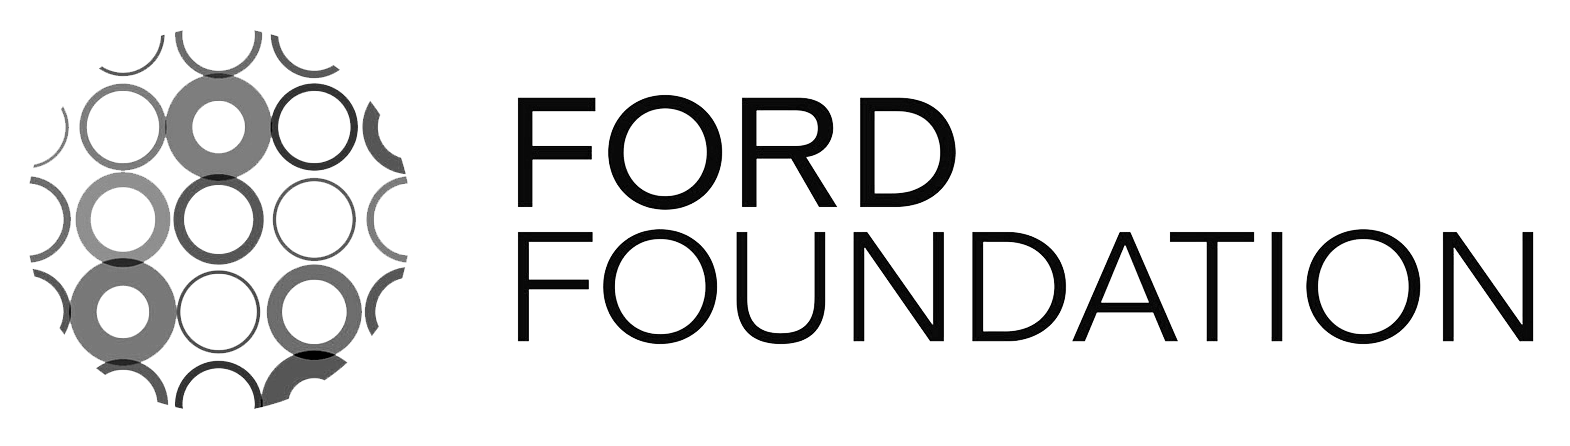 ford_logo copy.png